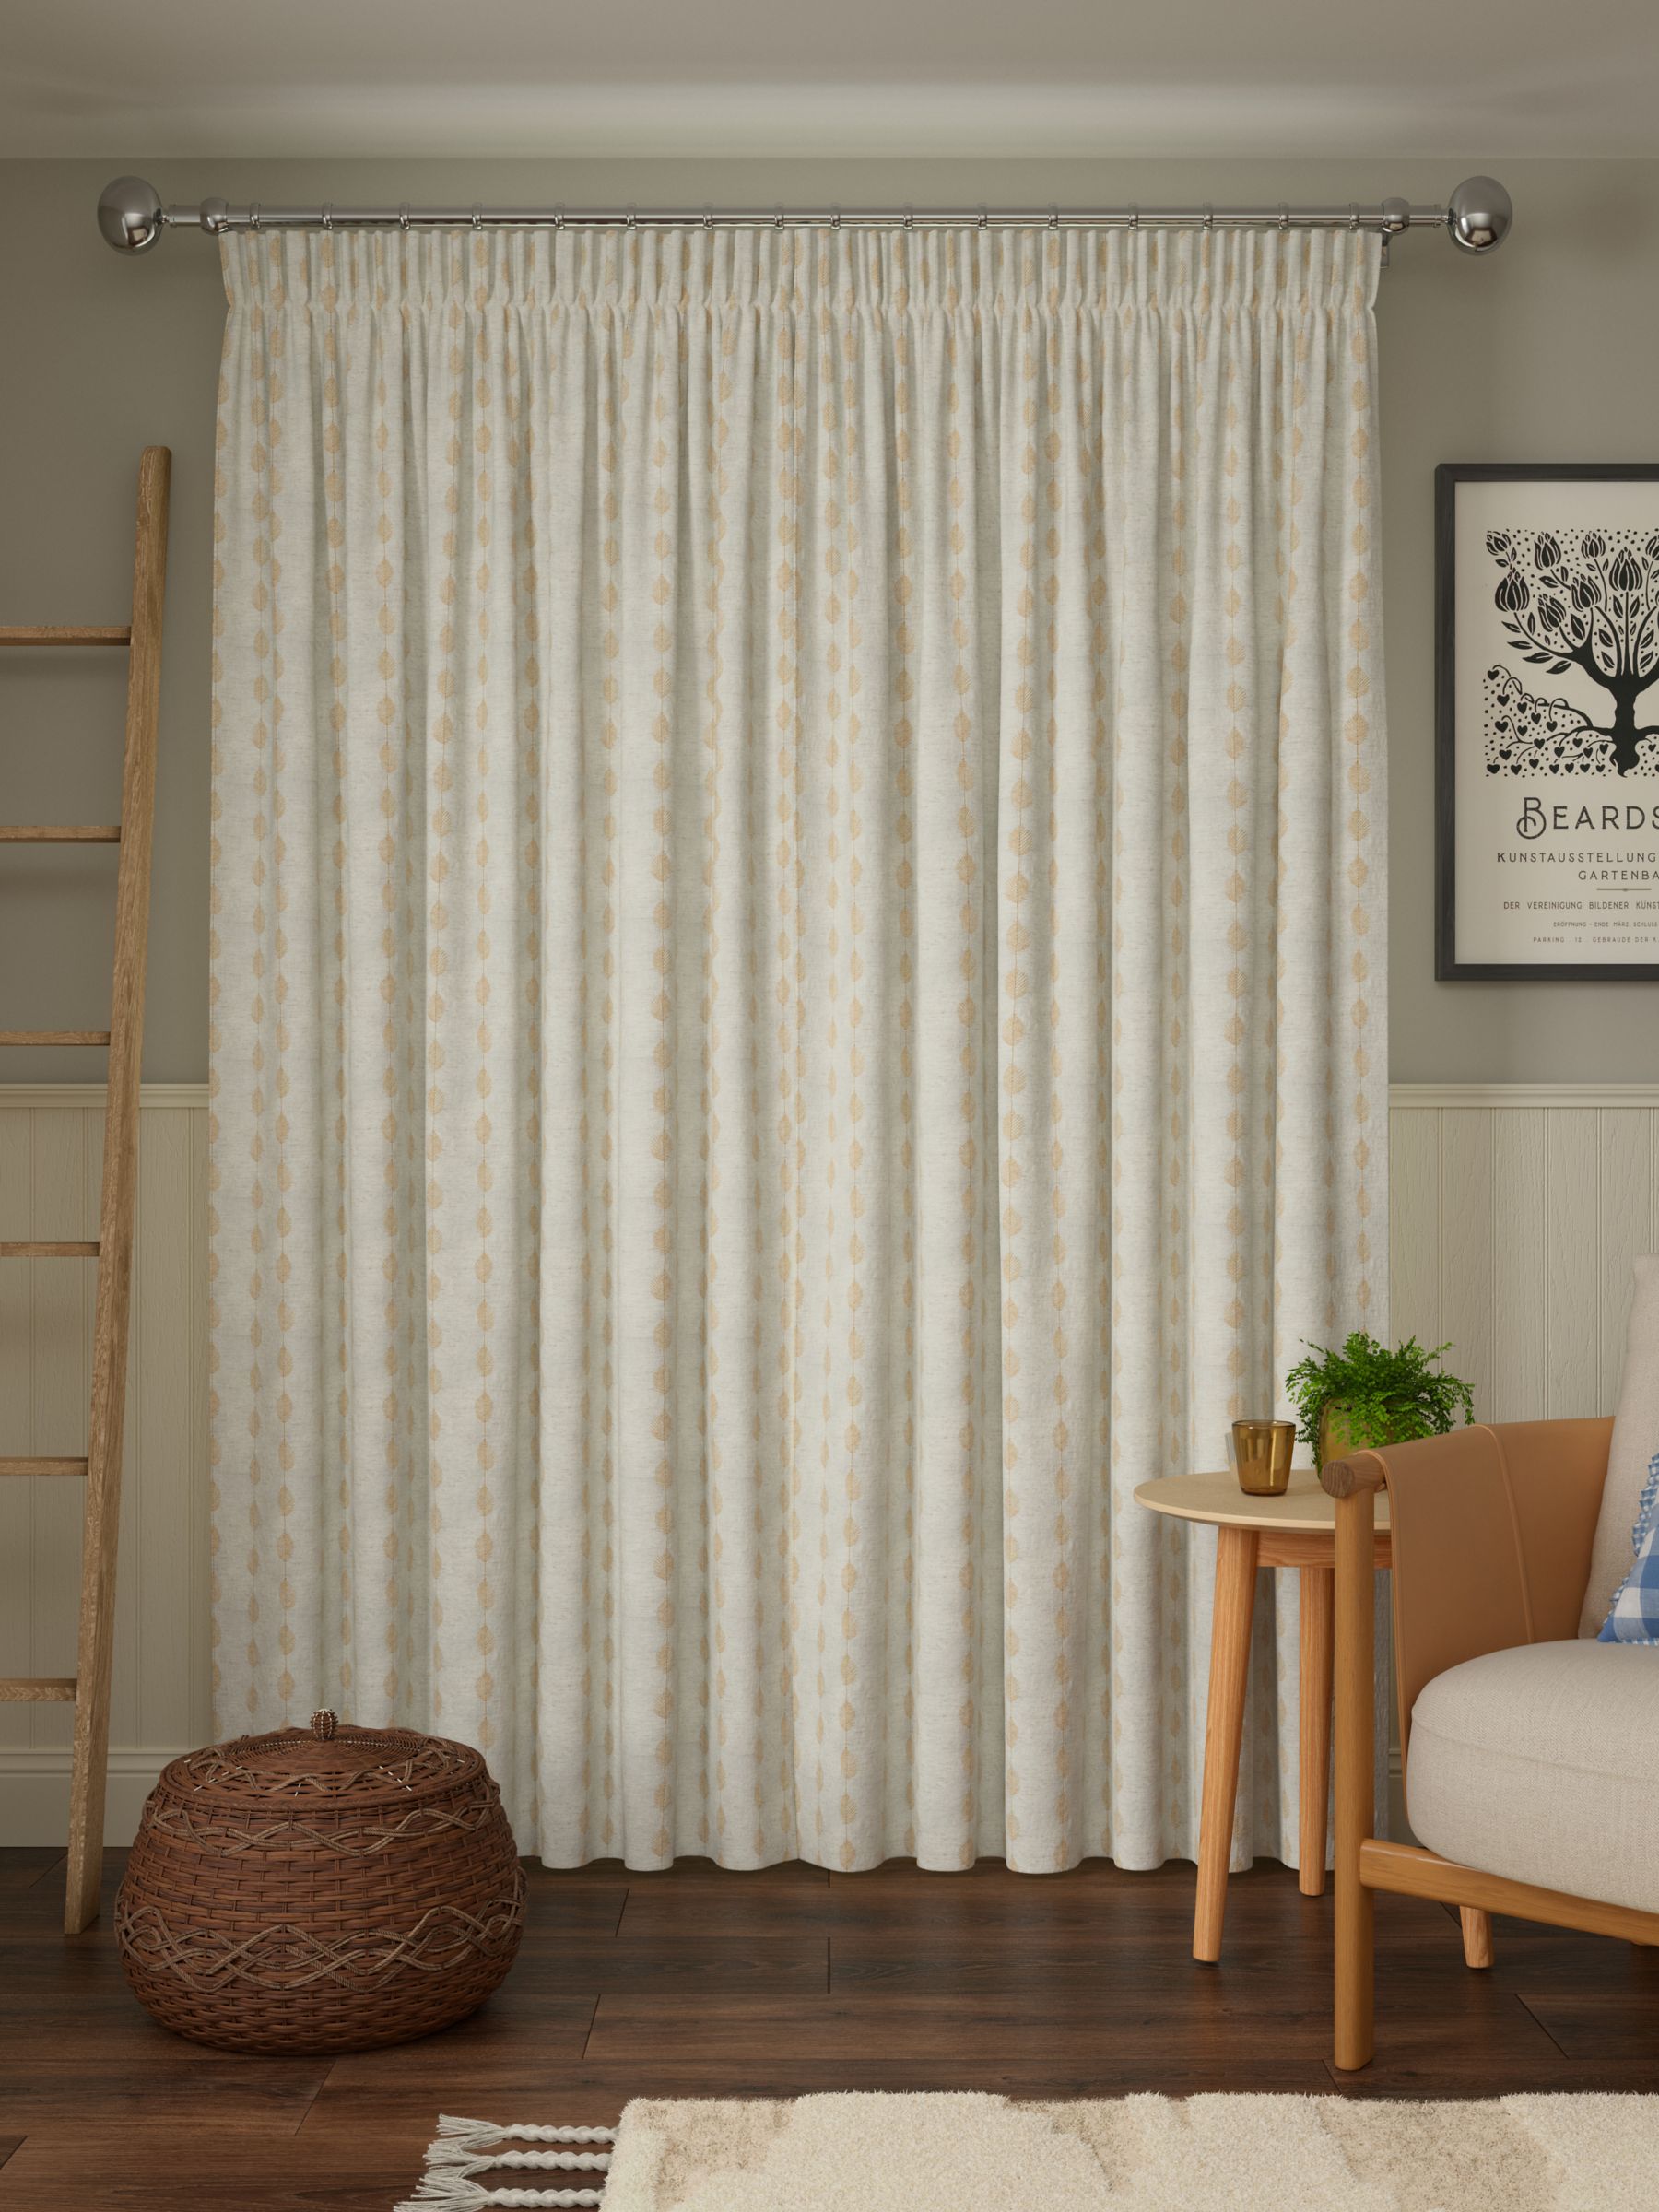 John Lewis Feather Leaf Embroidery Pair Lined Pencil Pleat Curtains, Honey